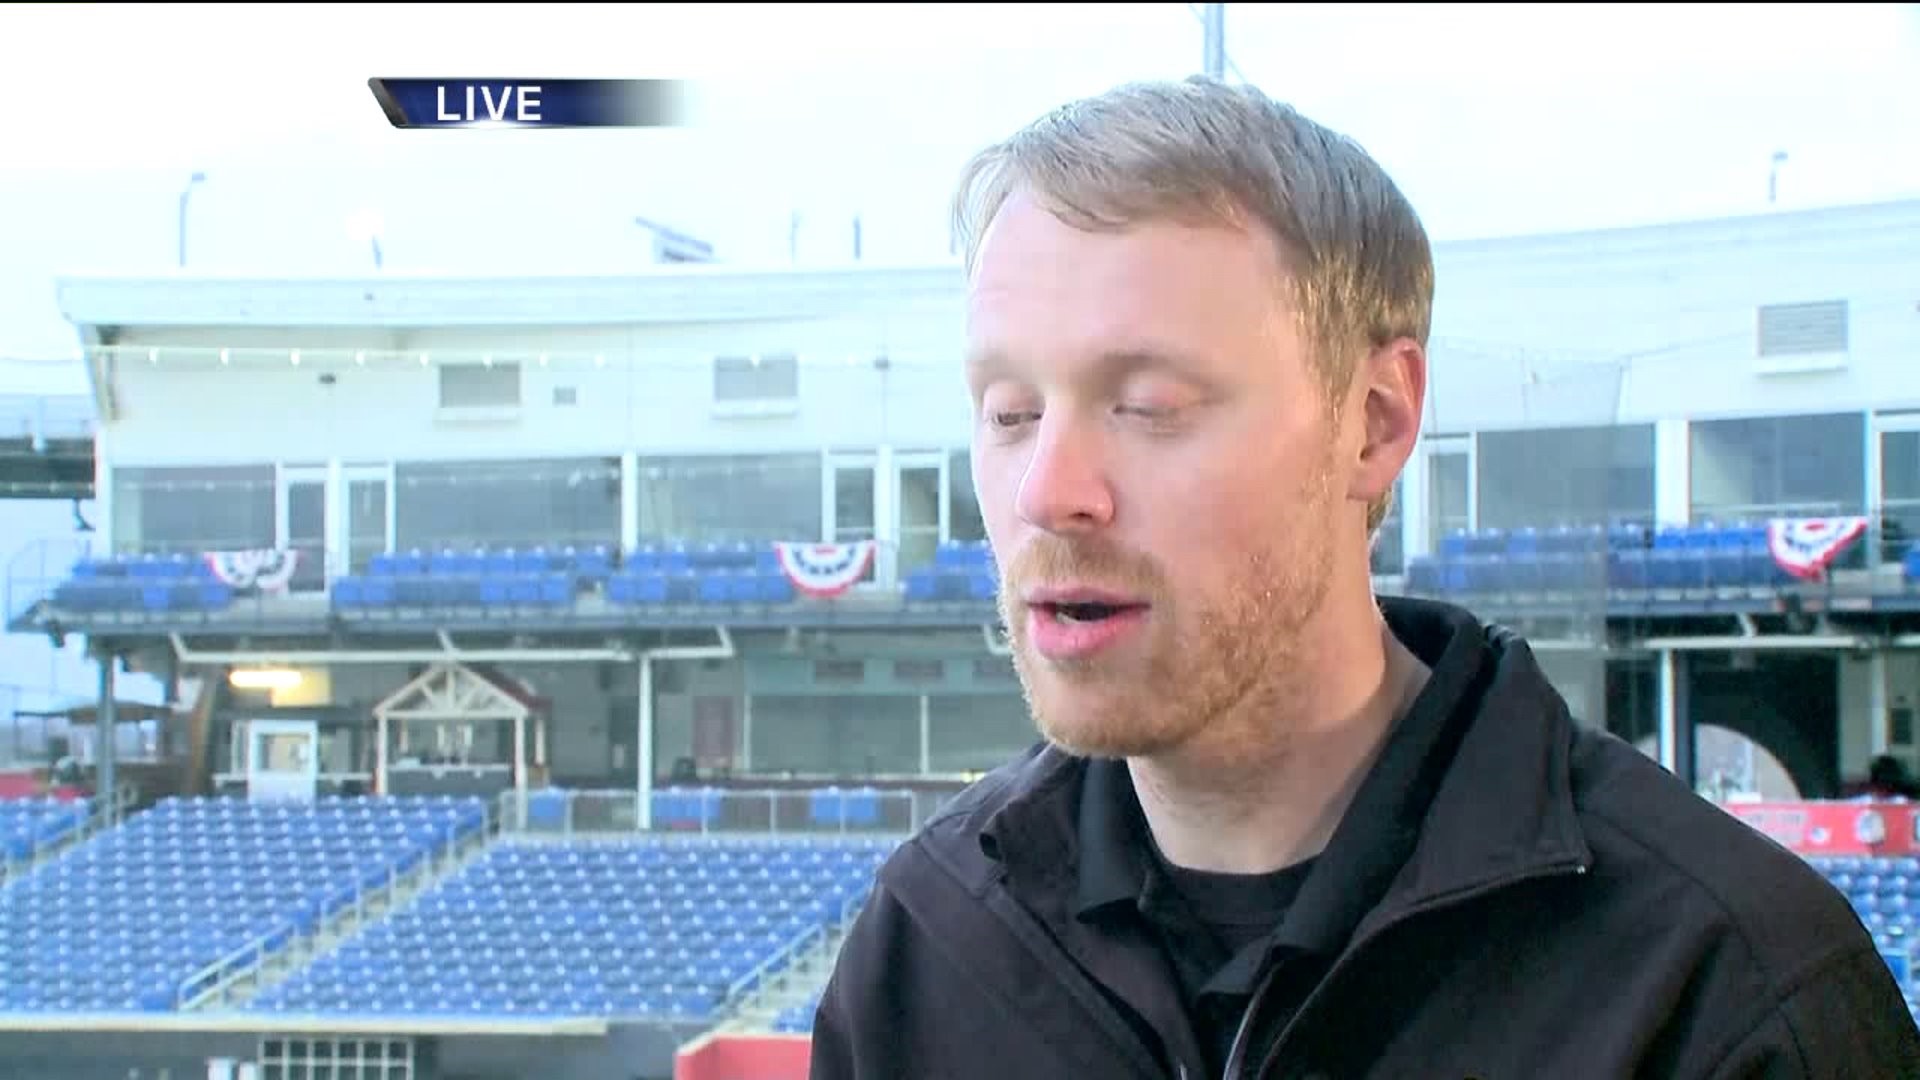 River Bandits` GM Talks About Upcoming Events for 2017 Season